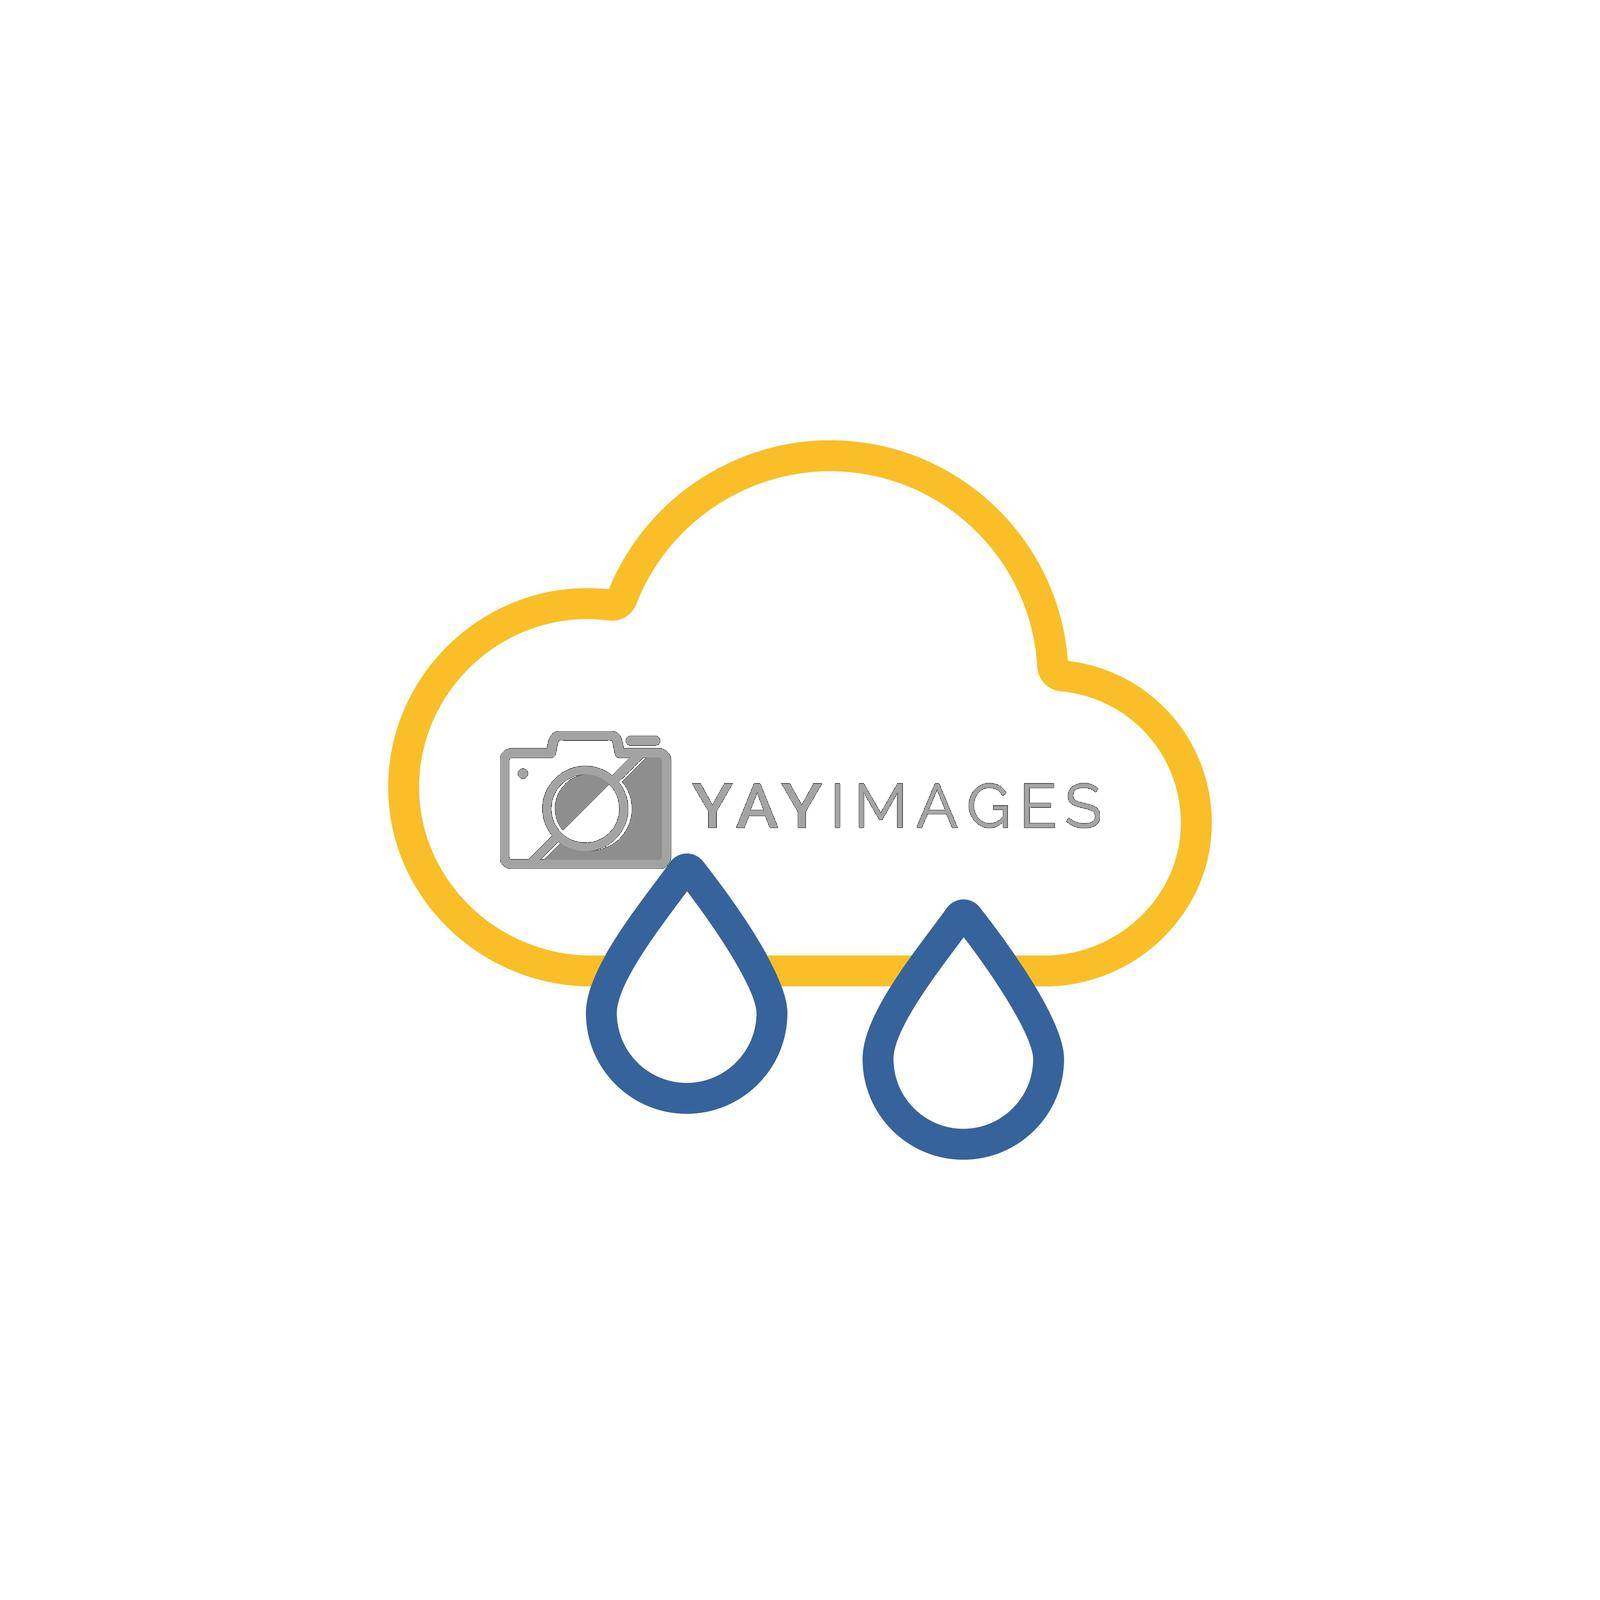 Raincloud with raindrops isolated vector icon. Meteorology sign. Graph symbol for travel, tourism and weather web site and apps design, logo, app, UI